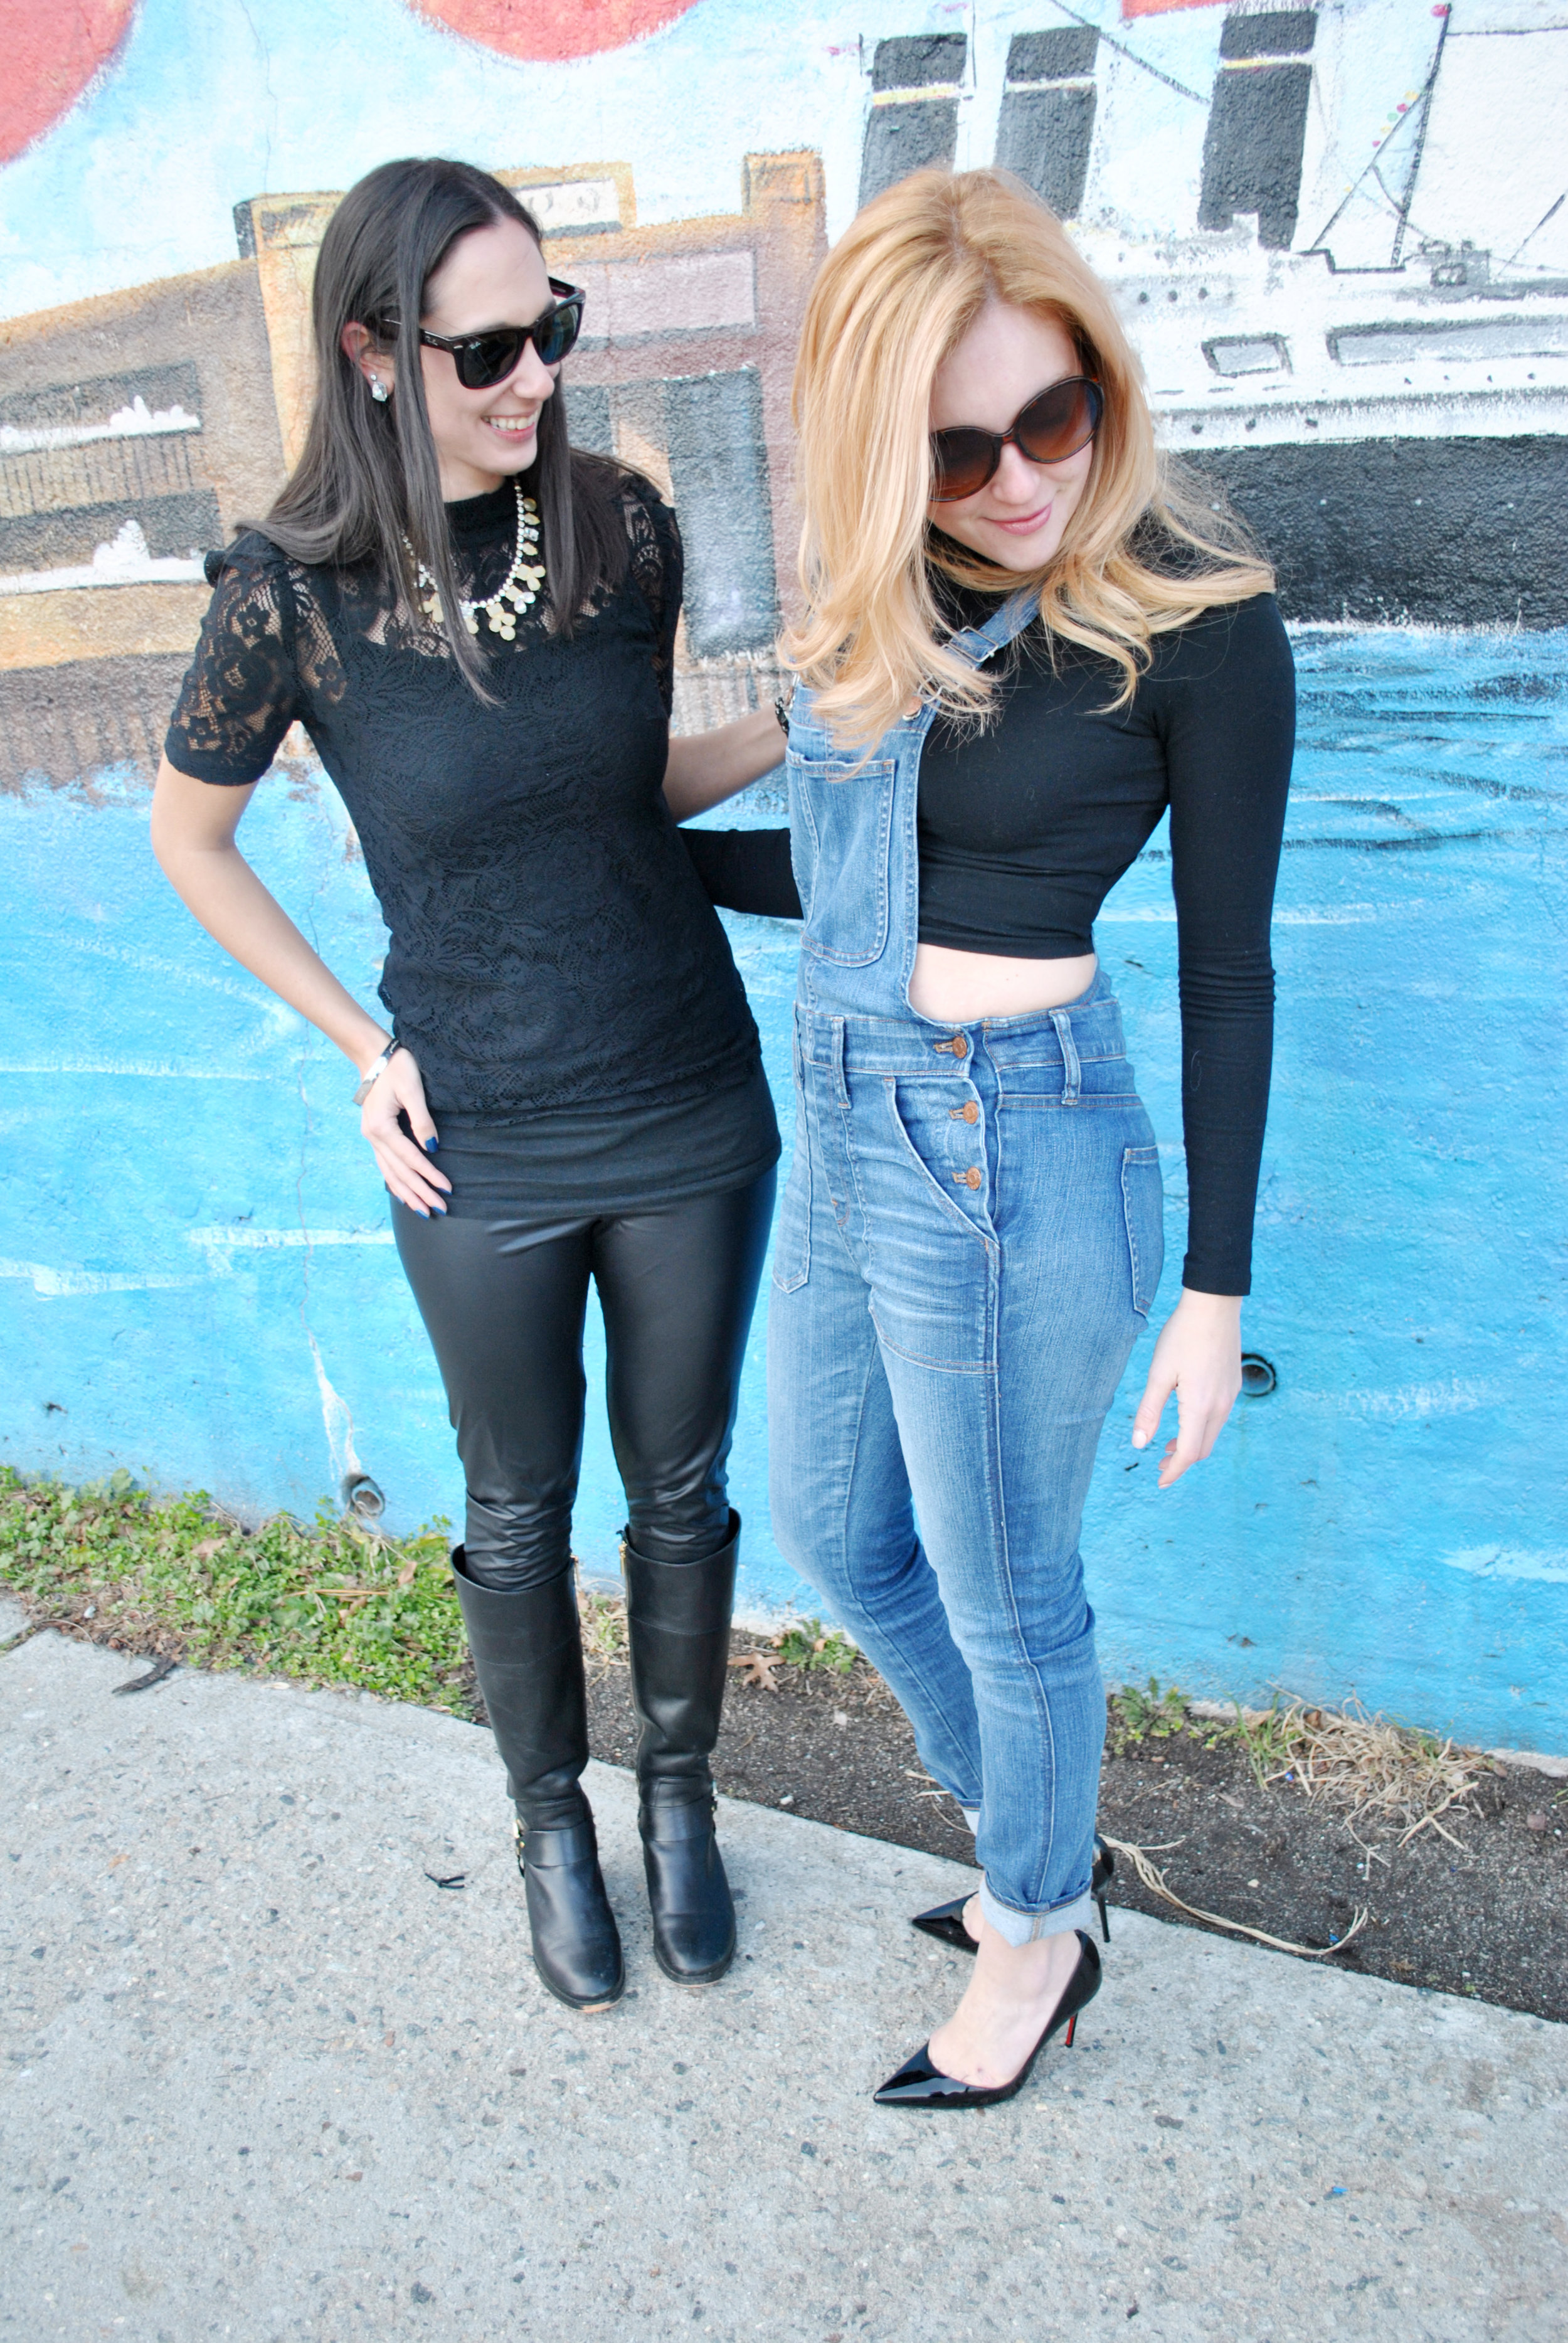 thoughtfulwish | best friends photoshoot, friends photoshoot, matching outfits, black outfits, overalls, michael kors, christian louboutin, j.crew, hoboken, fblog, fashion blog, fashion blogger